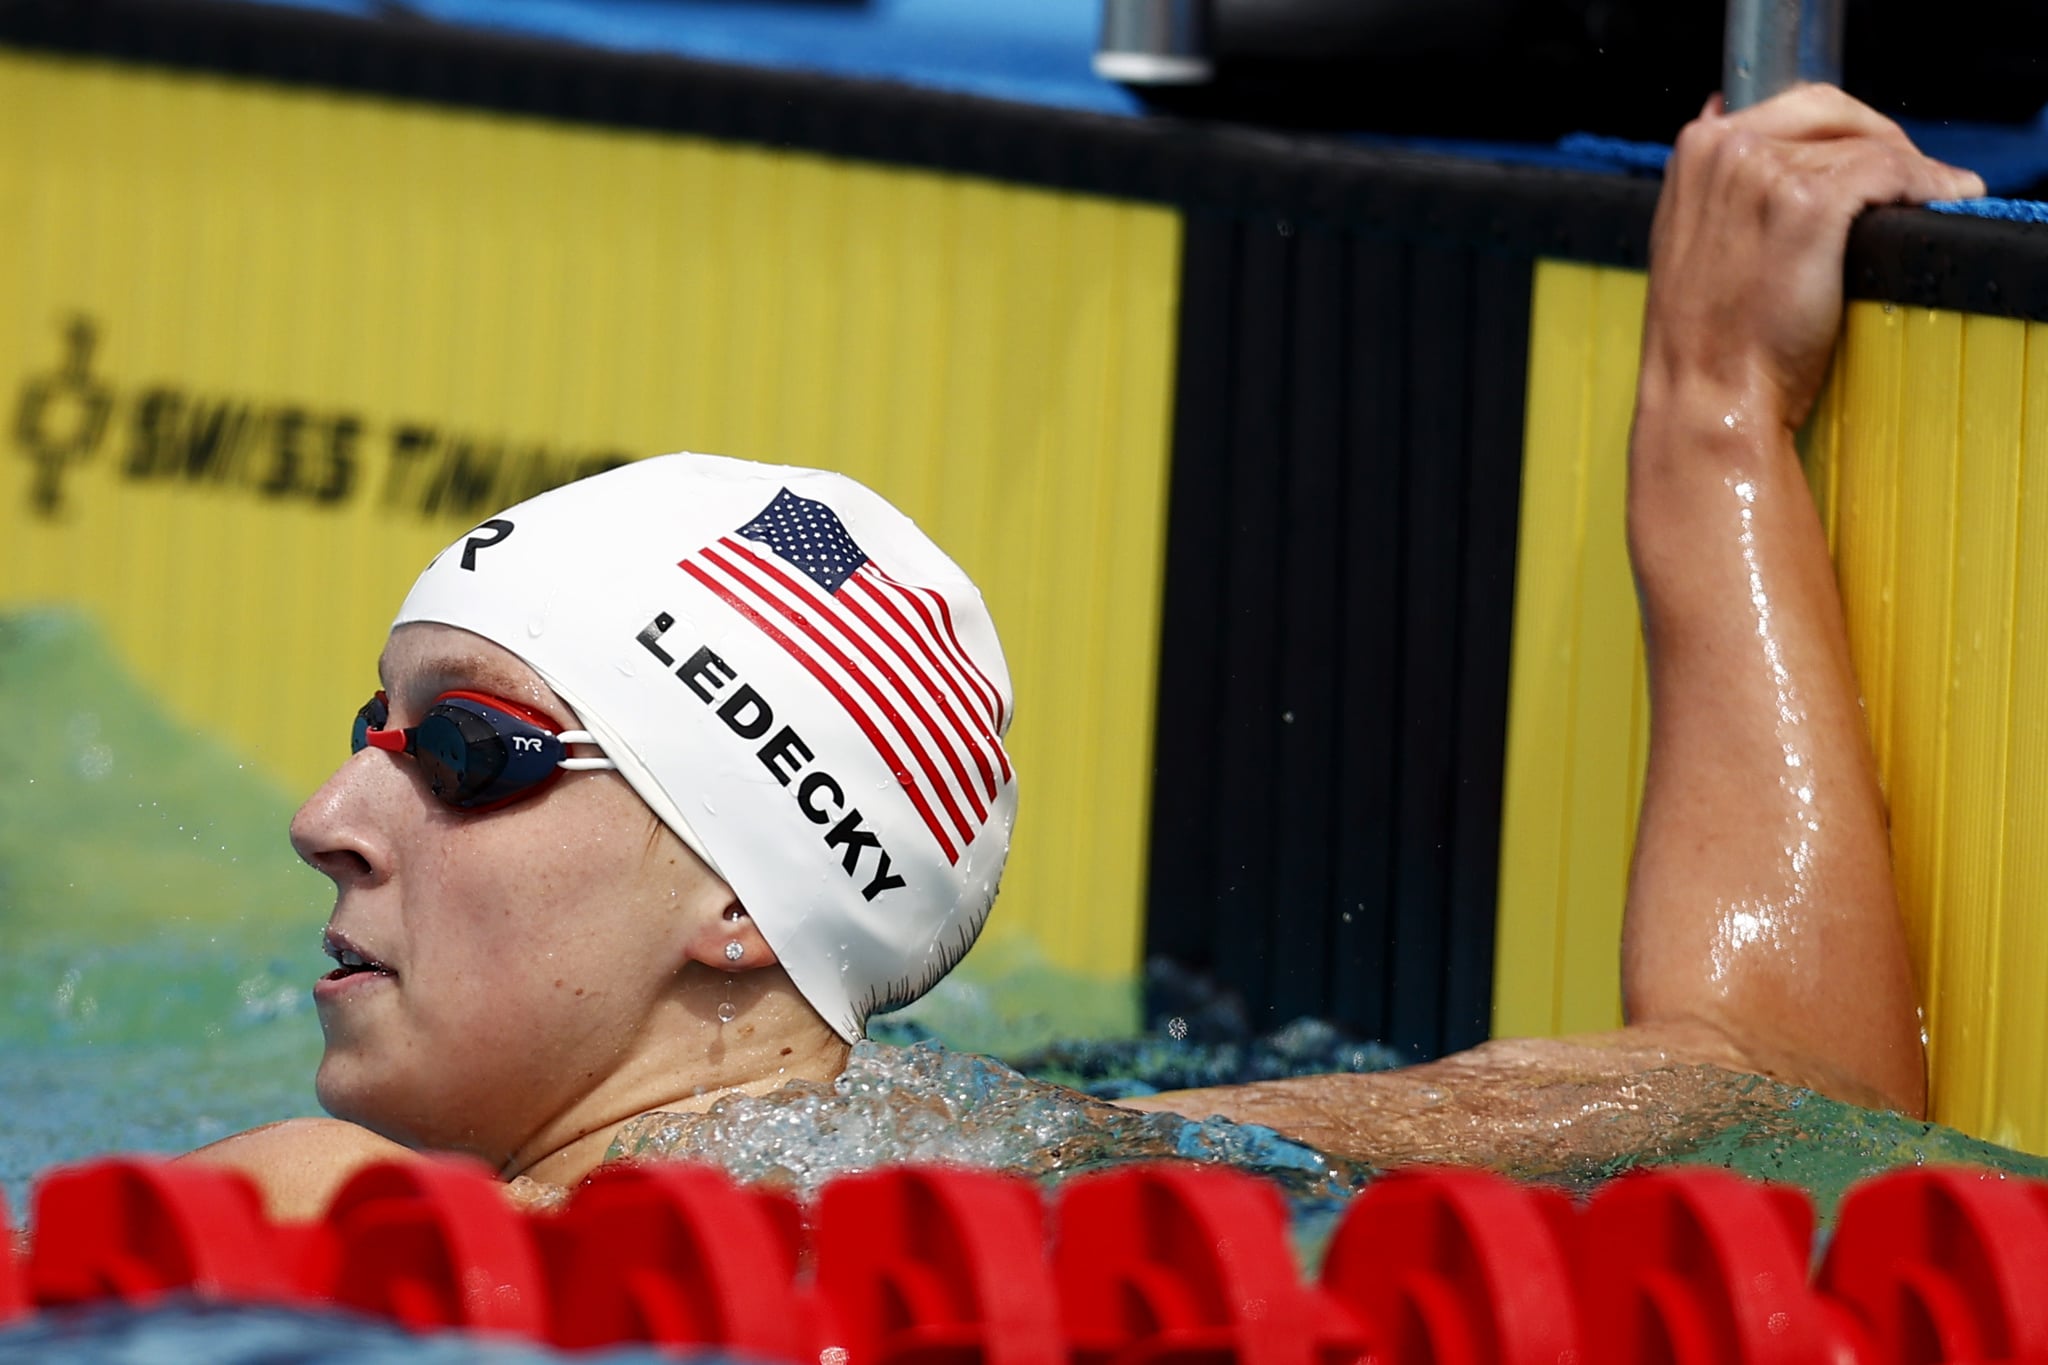 MISSION VIEJO, CALIFORNIA - APRIL 11: Katie Ledecky looks on after competing in the Women's 100 Meter Freestyle Final on Day Four of the TYR Pro Swim Series at Mission Viejo at Marguerite Aquatics Center on April 11, 2021 in Mission Viejo, California.   (Photo by Maddie Meyer/Getty Images)